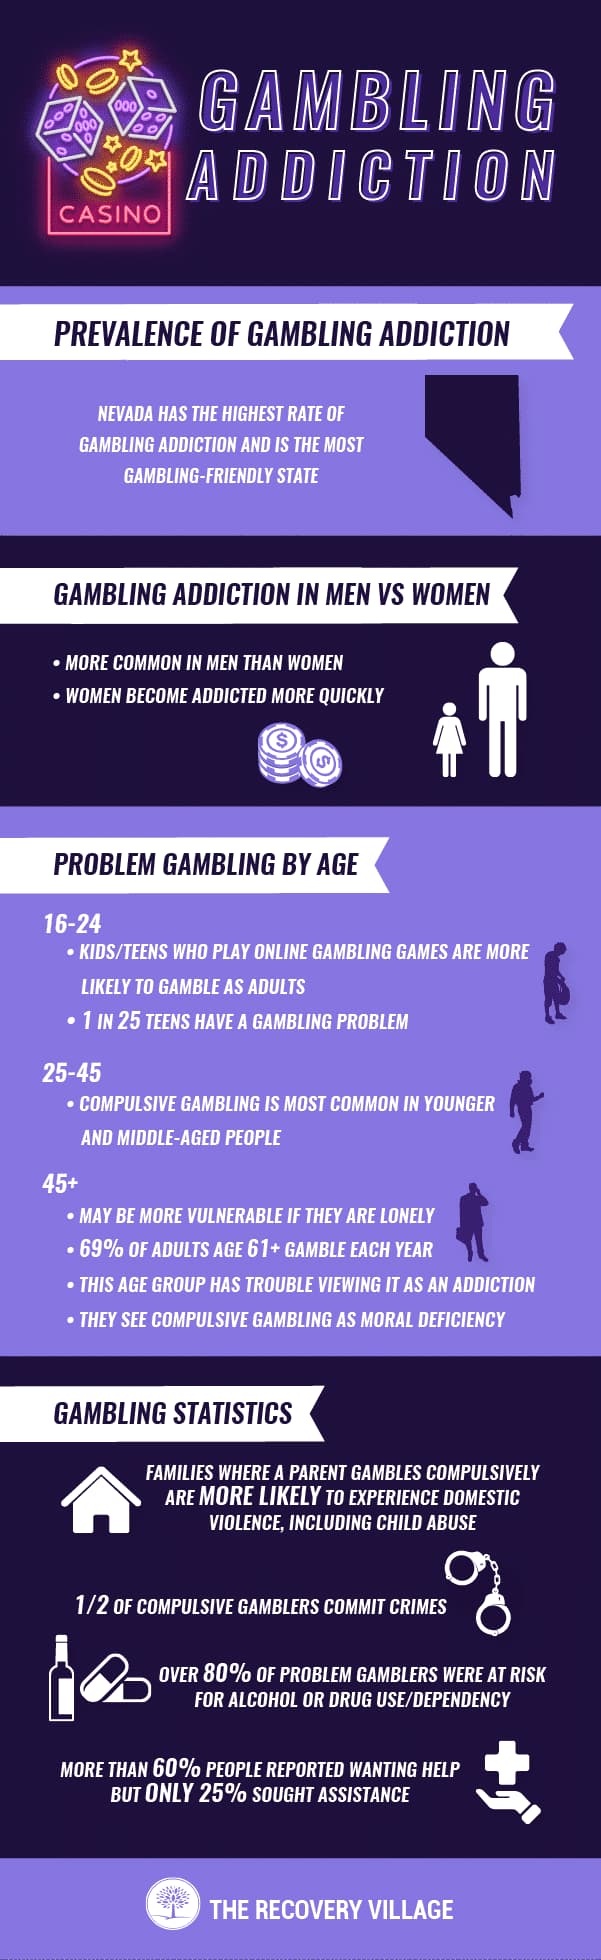 Facts about gambling addiction (The Recovery Village)